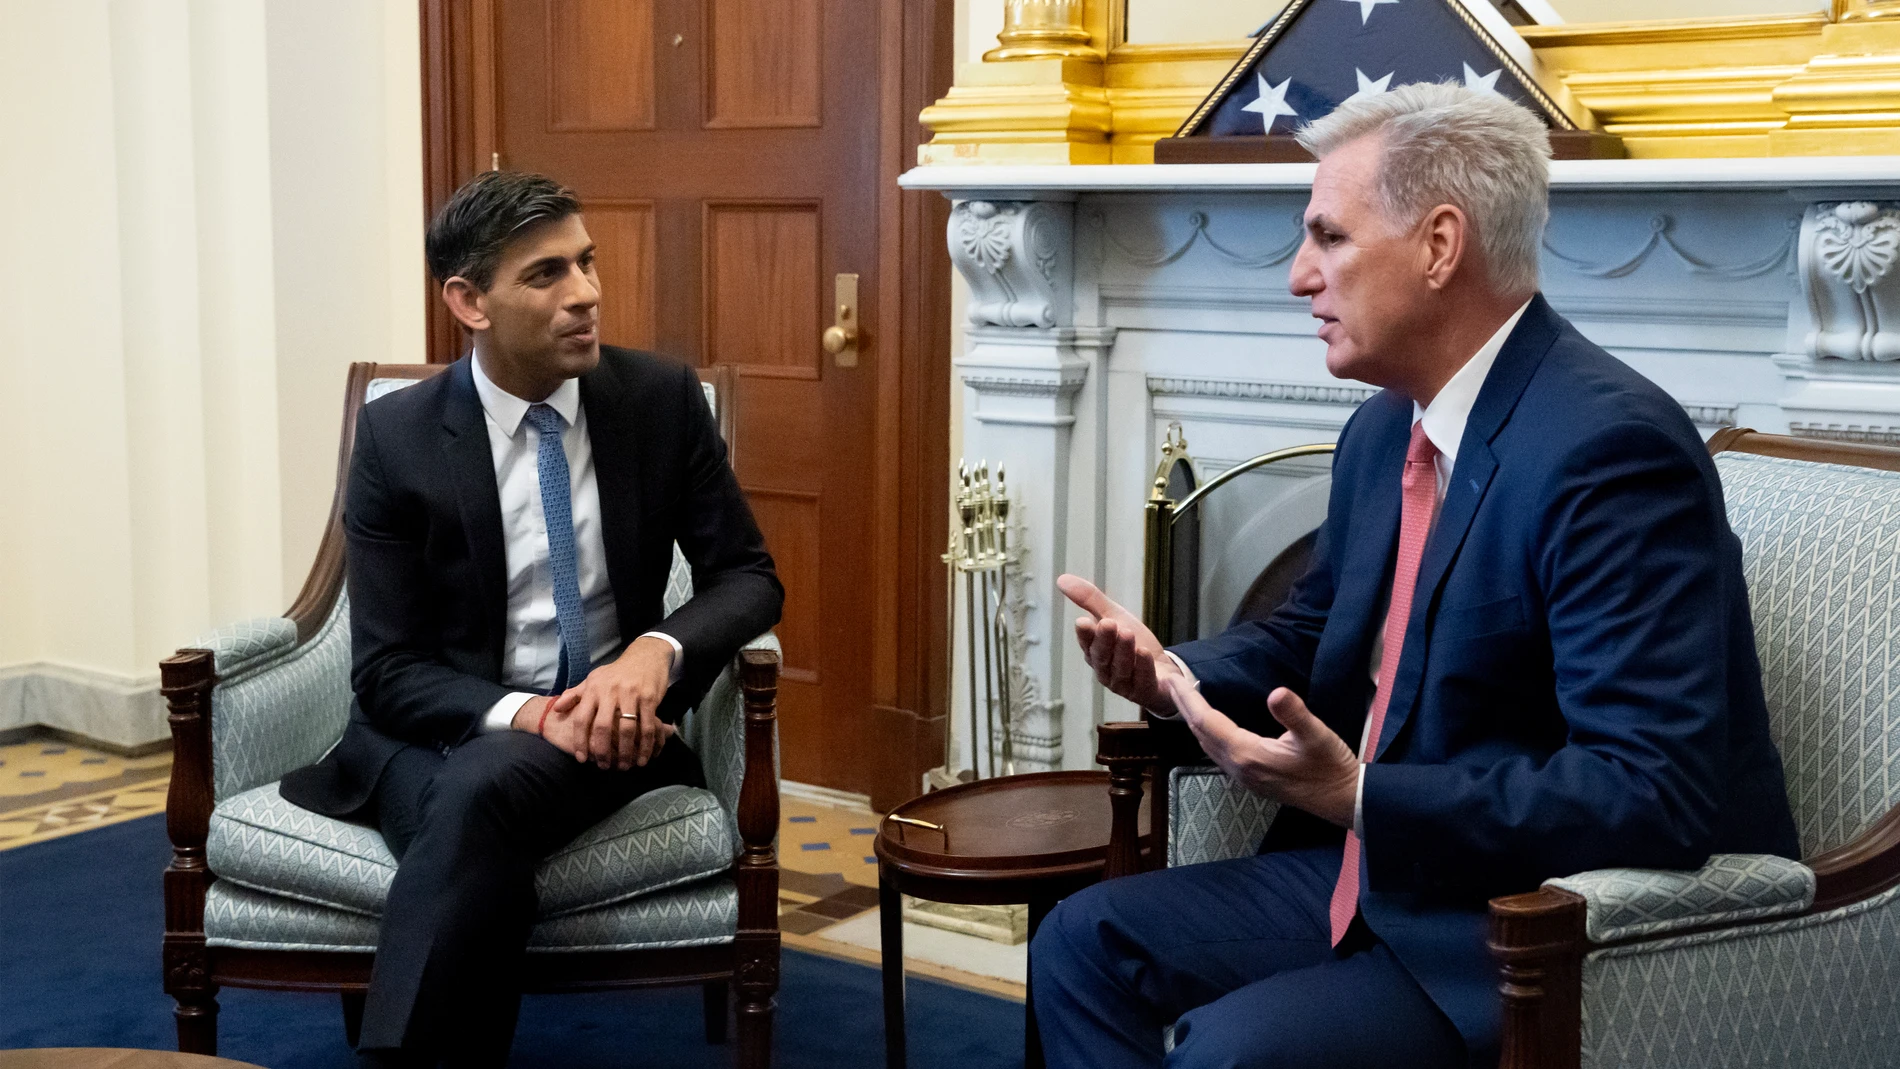 Washington (United States), 07/06/2023.- British Prime Minister Rishi Sunak (L) meets with US Speaker of the House Kevin McCarthy (R) on Capitol Hill in Washington, DC, USA, 07 June 2023. Sunak is in Washington to visit members of Congress and to visit US President Joe Biden at the White House on 08 June. (Reino Unido, Estados Unidos) EFE/EPA/MICHAEL REYNOLDS